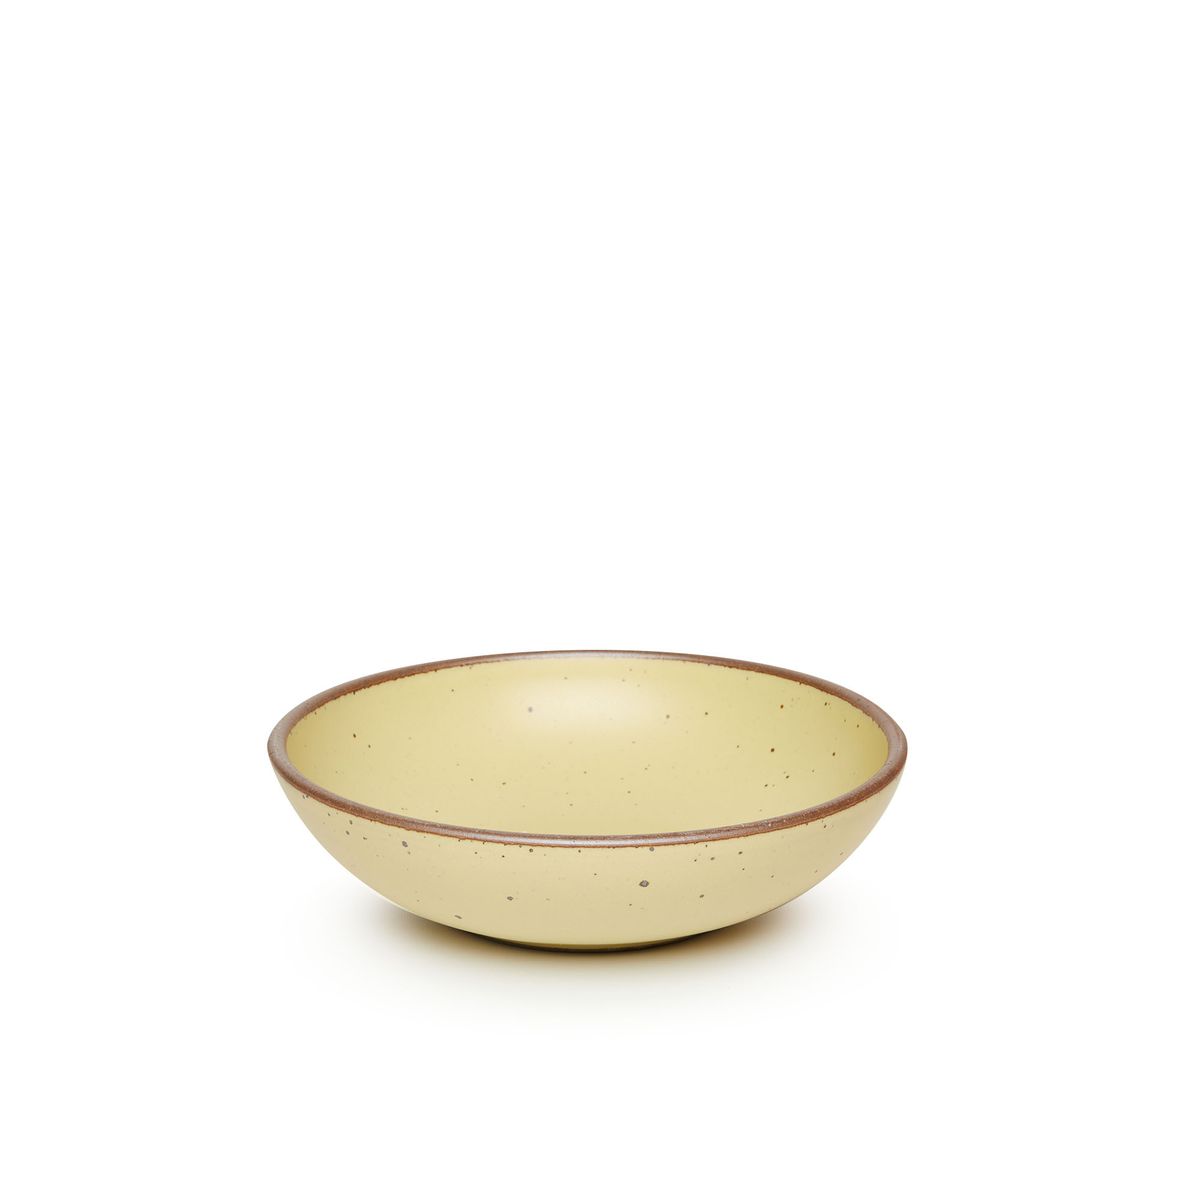 A dinner-sized shallow ceramic bowl in a light butter yellow color featuring iron speckles and an unglazed rim